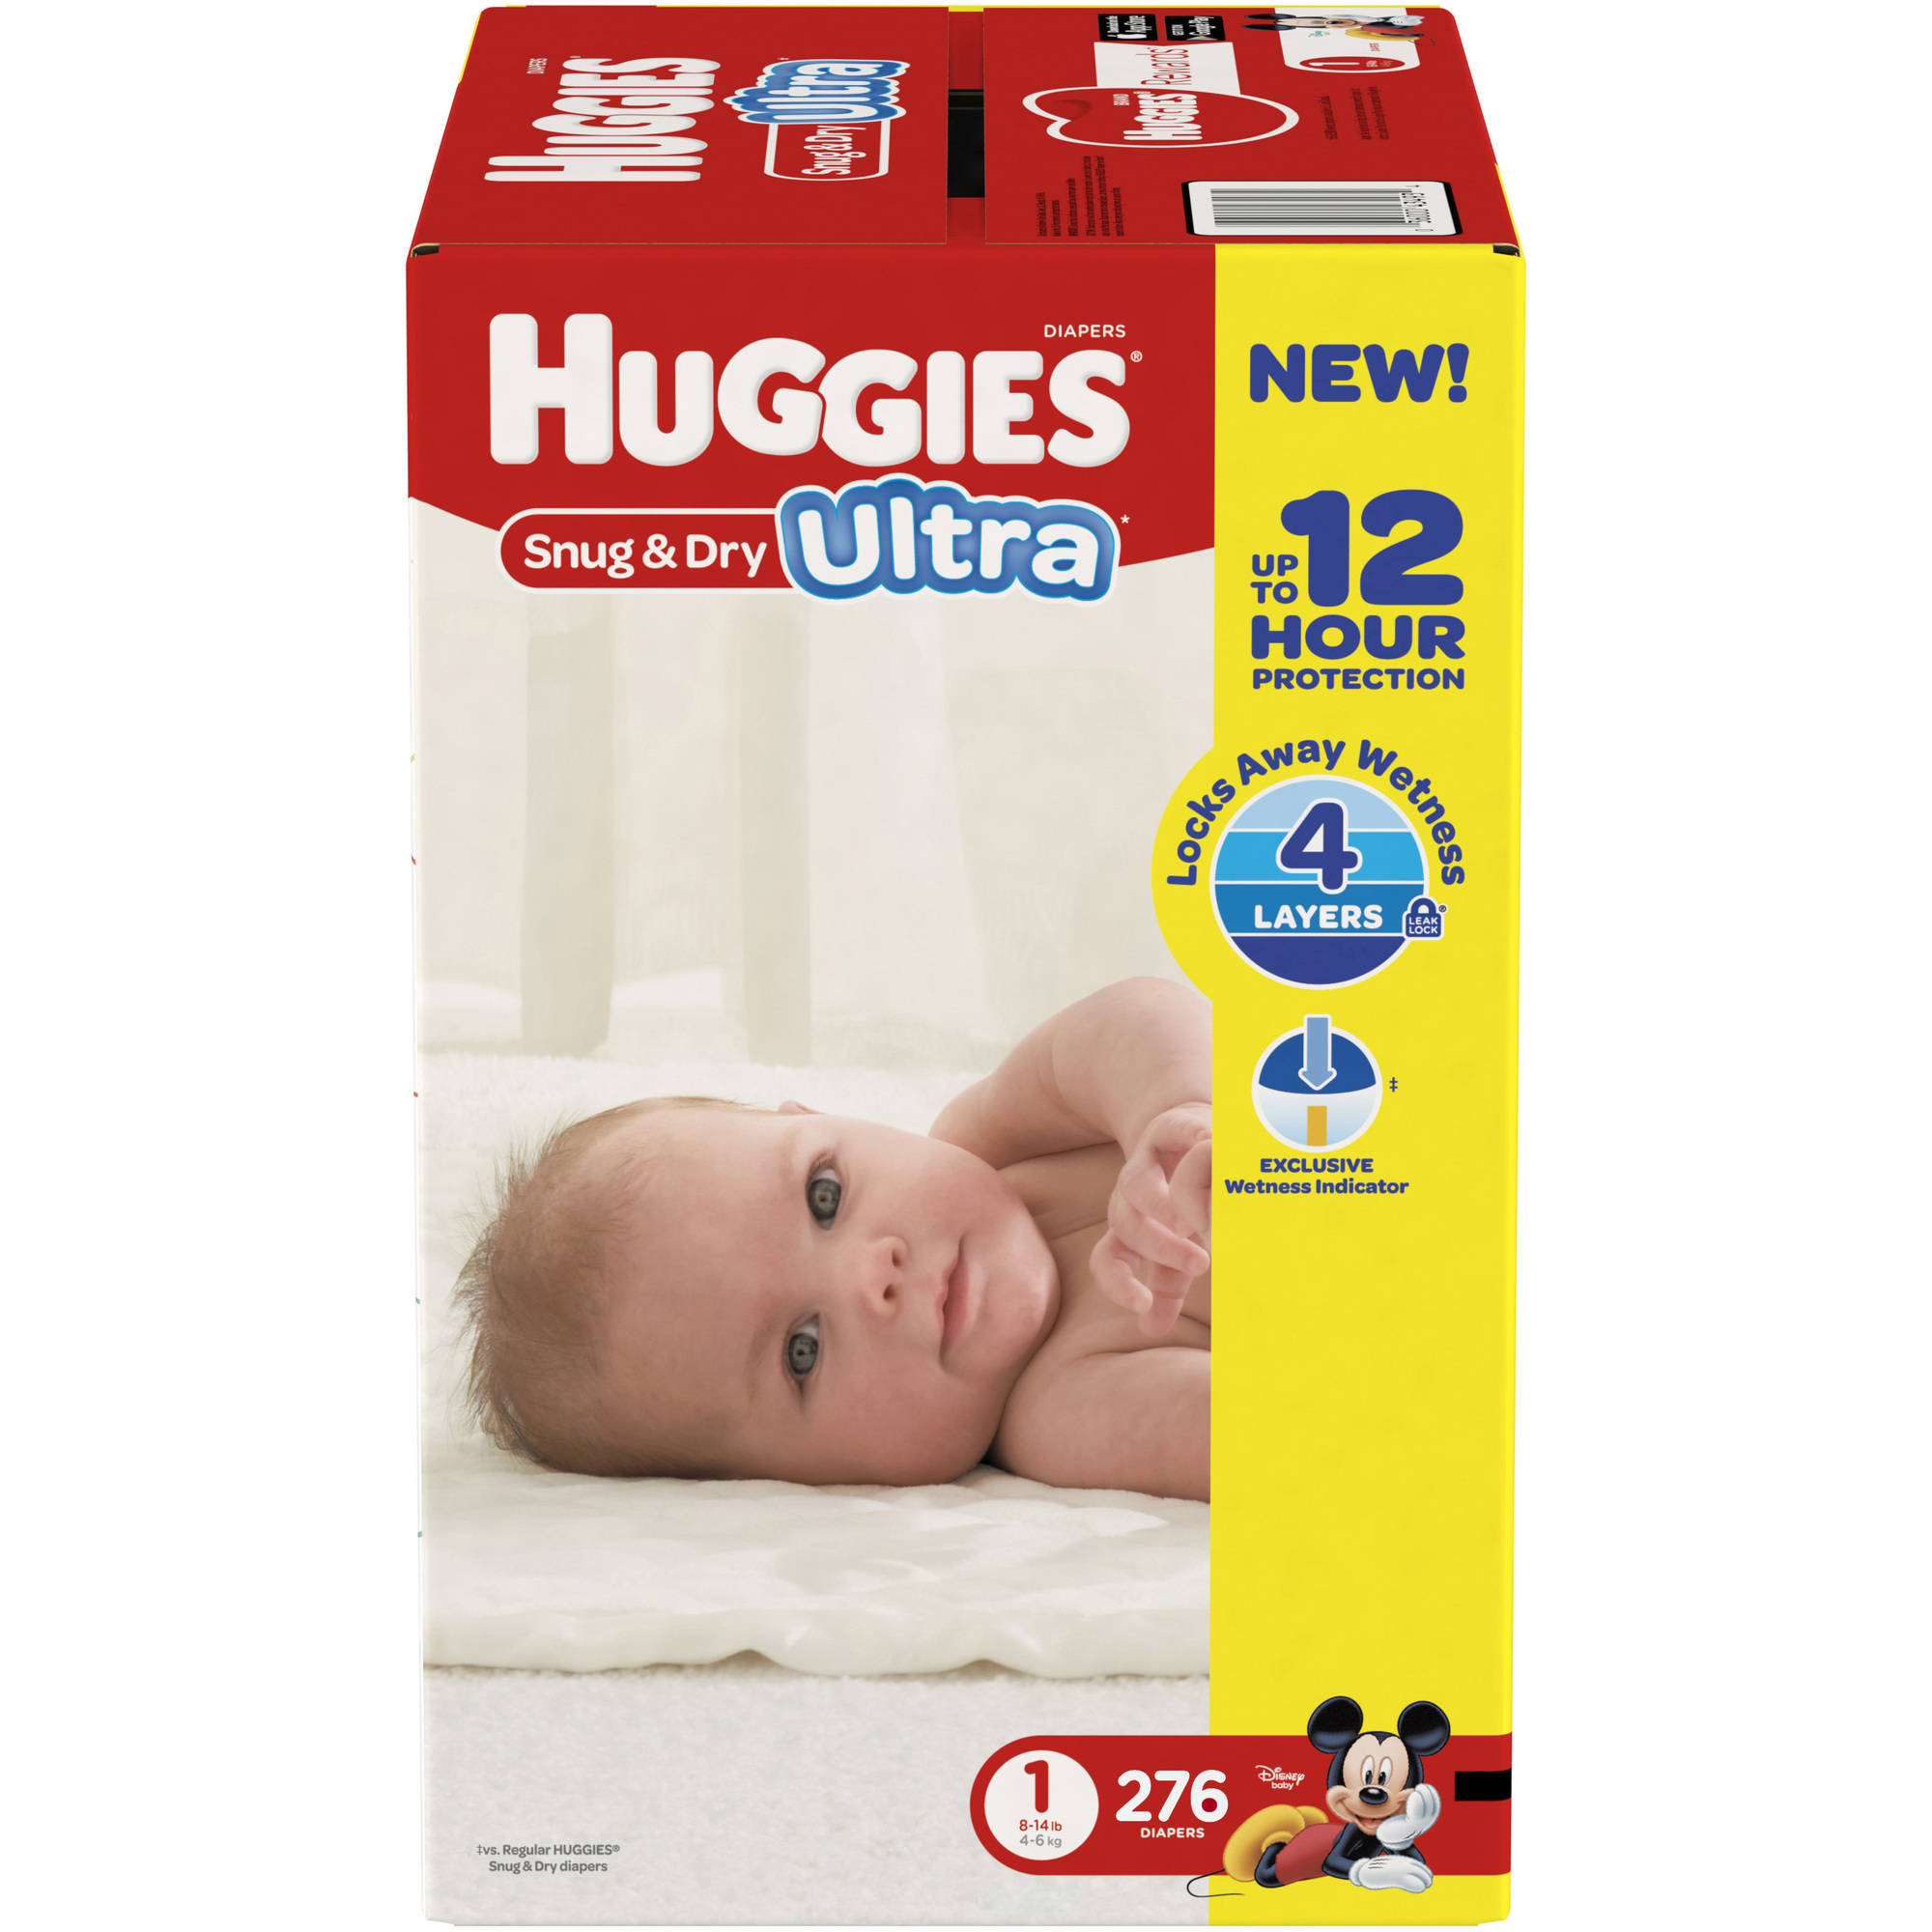 HUGGIES Snug & Dry Ultra Diapers, Size 1, 276 Diapers - image 1 of 11